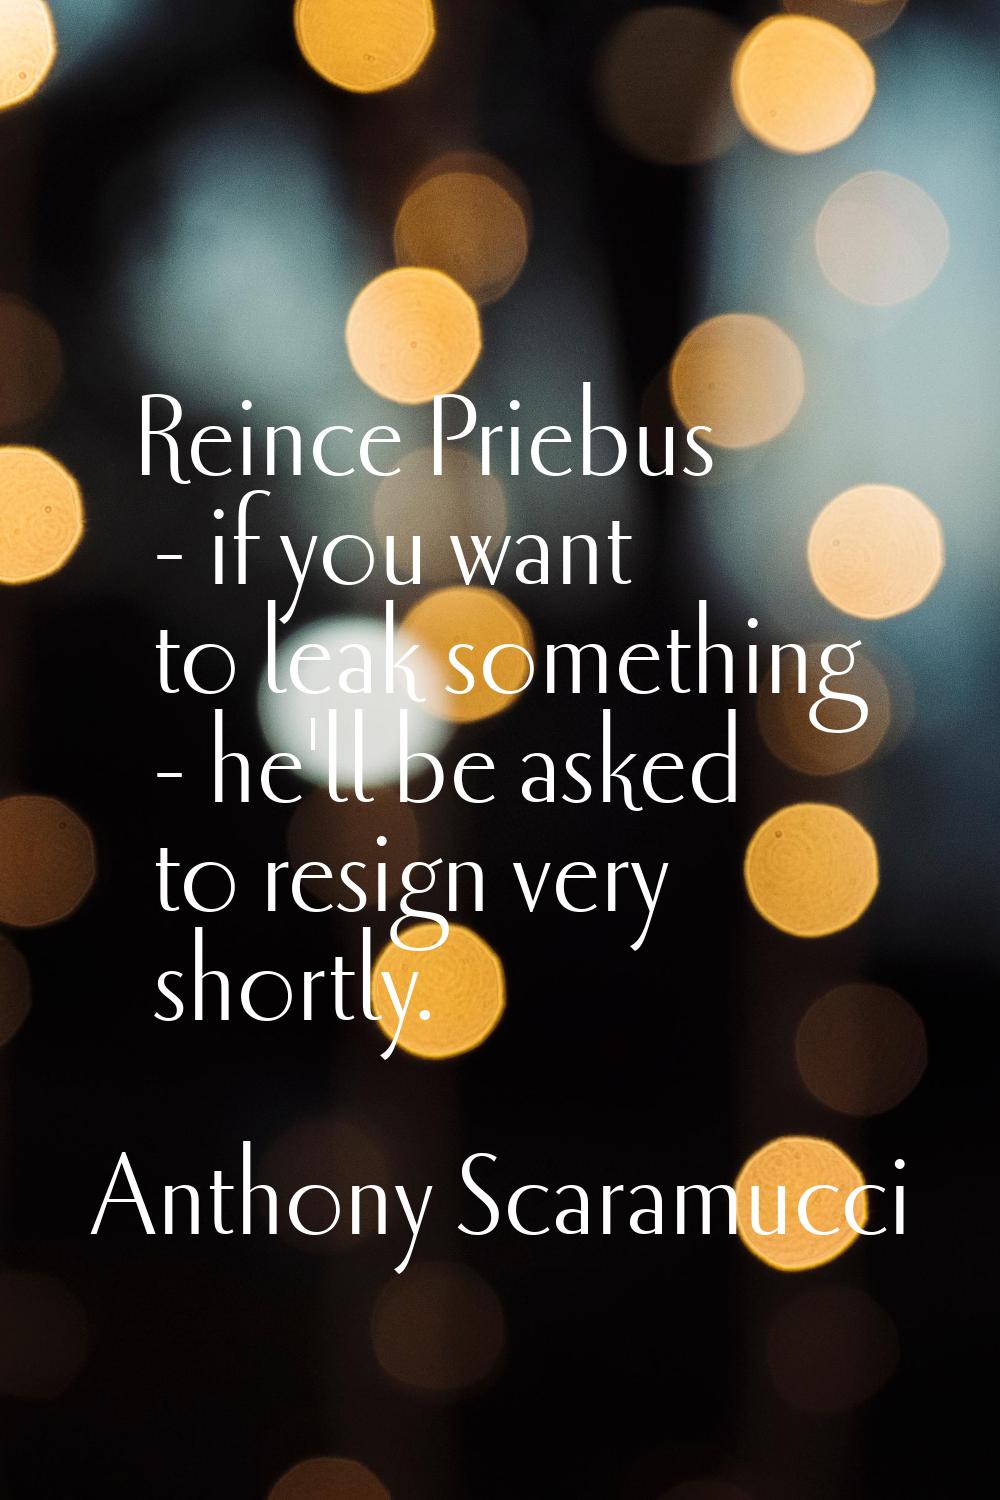 Reince Priebus - if you want to leak something - he'll be asked to resign very shortly.